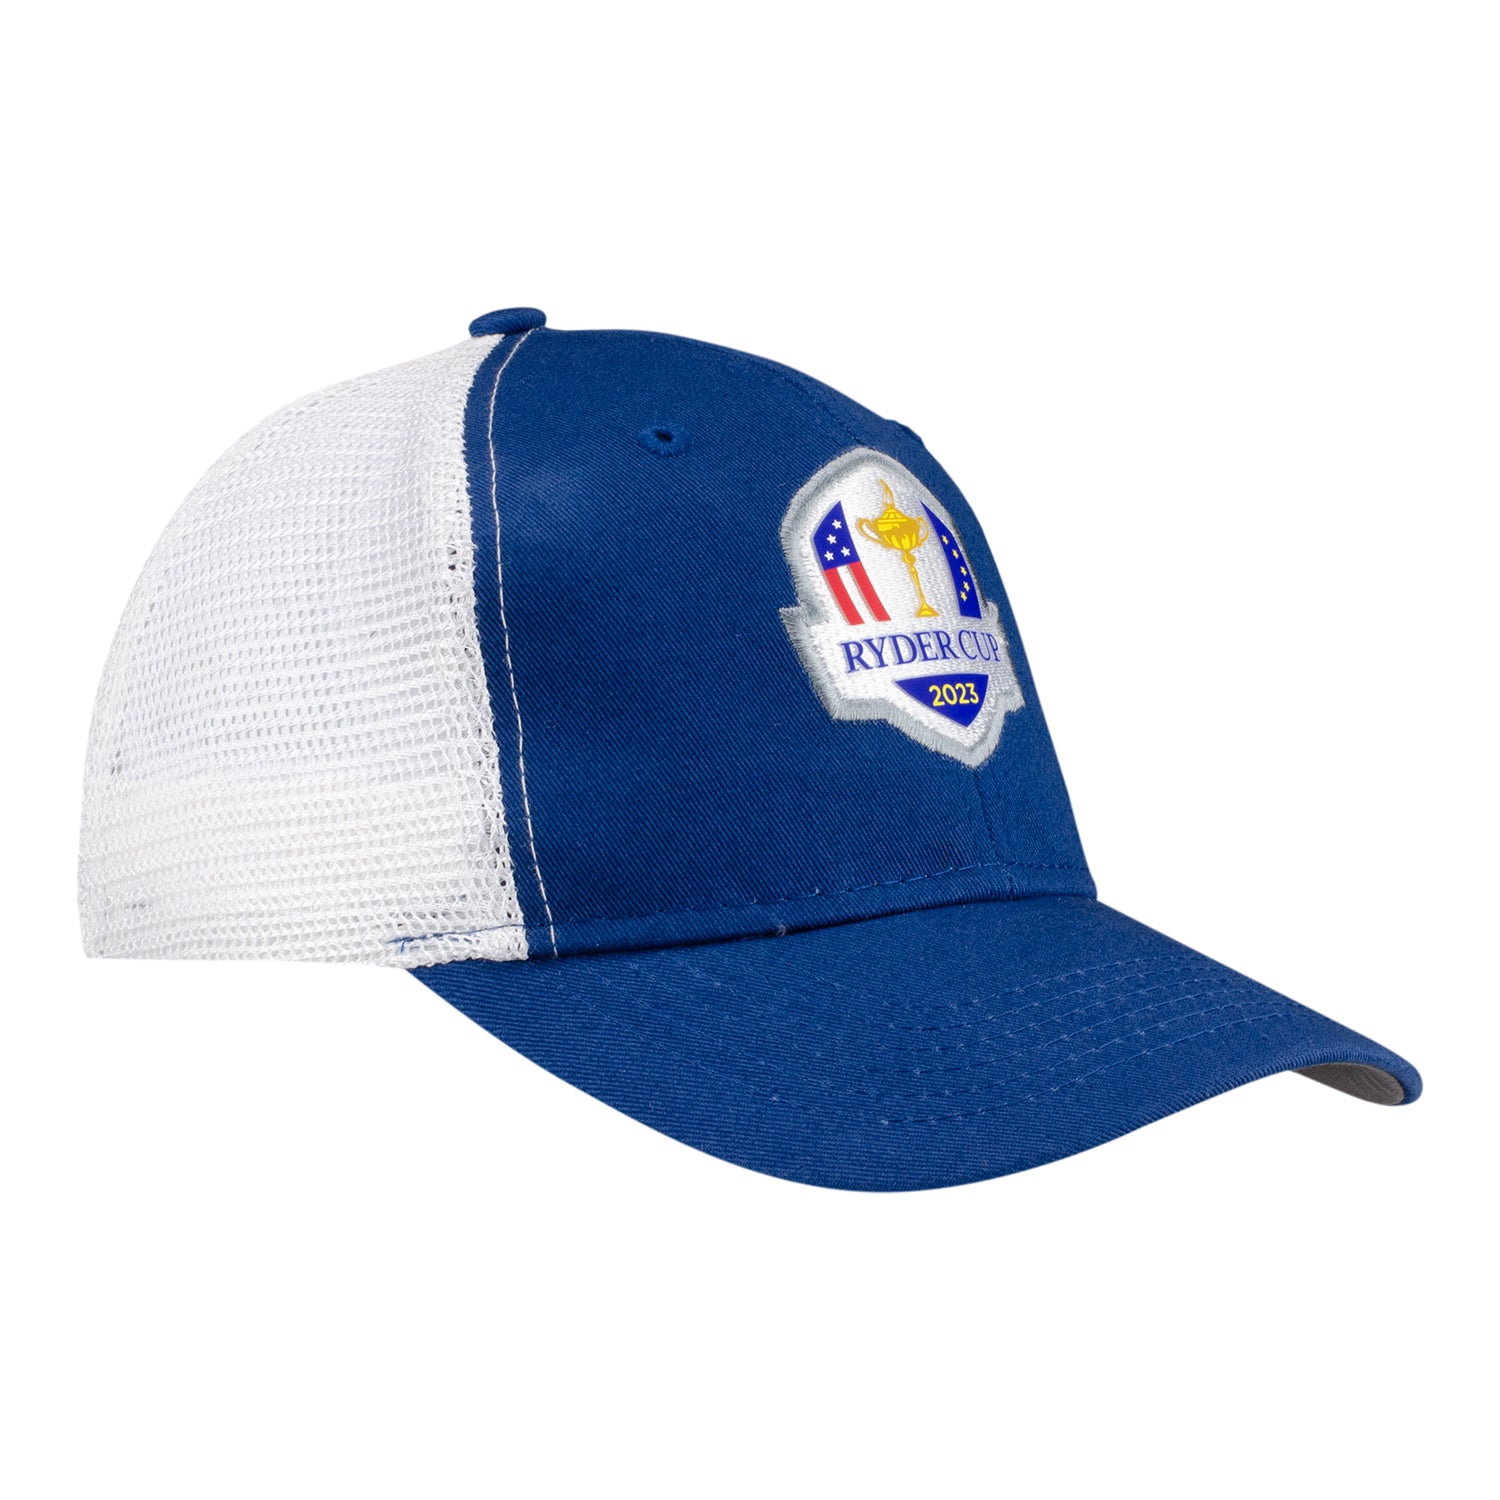 Imperial 2023 Ryder Cup Youth Hat - Front View